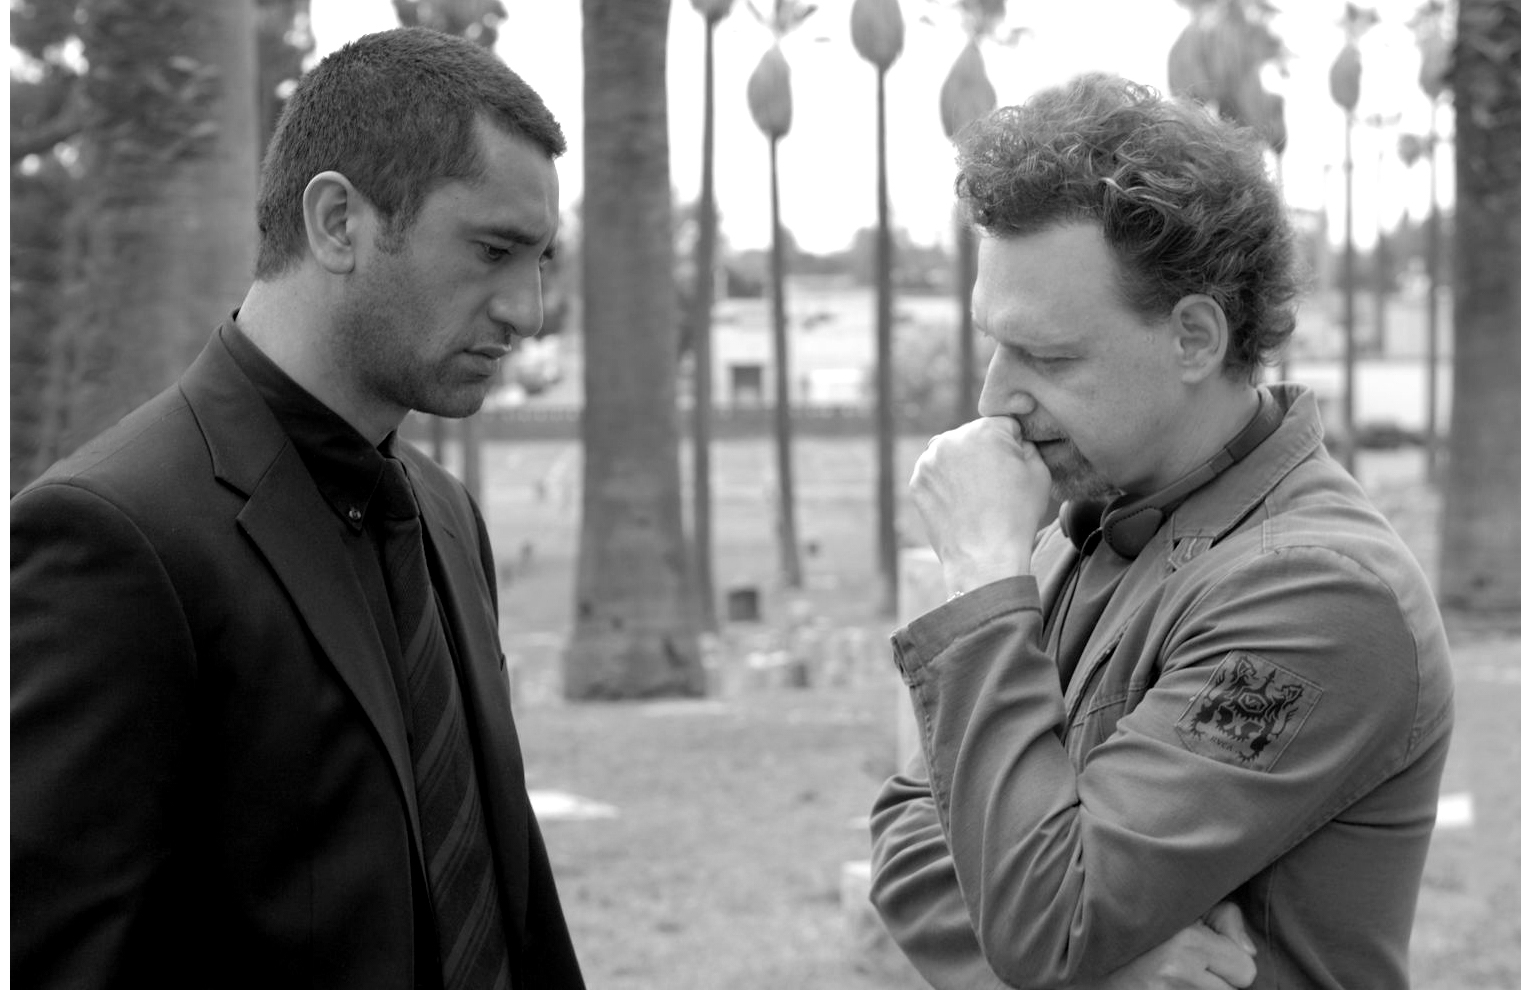 Wayne Kramer directs Cliff Curtis on the set of CROSSING OVER.